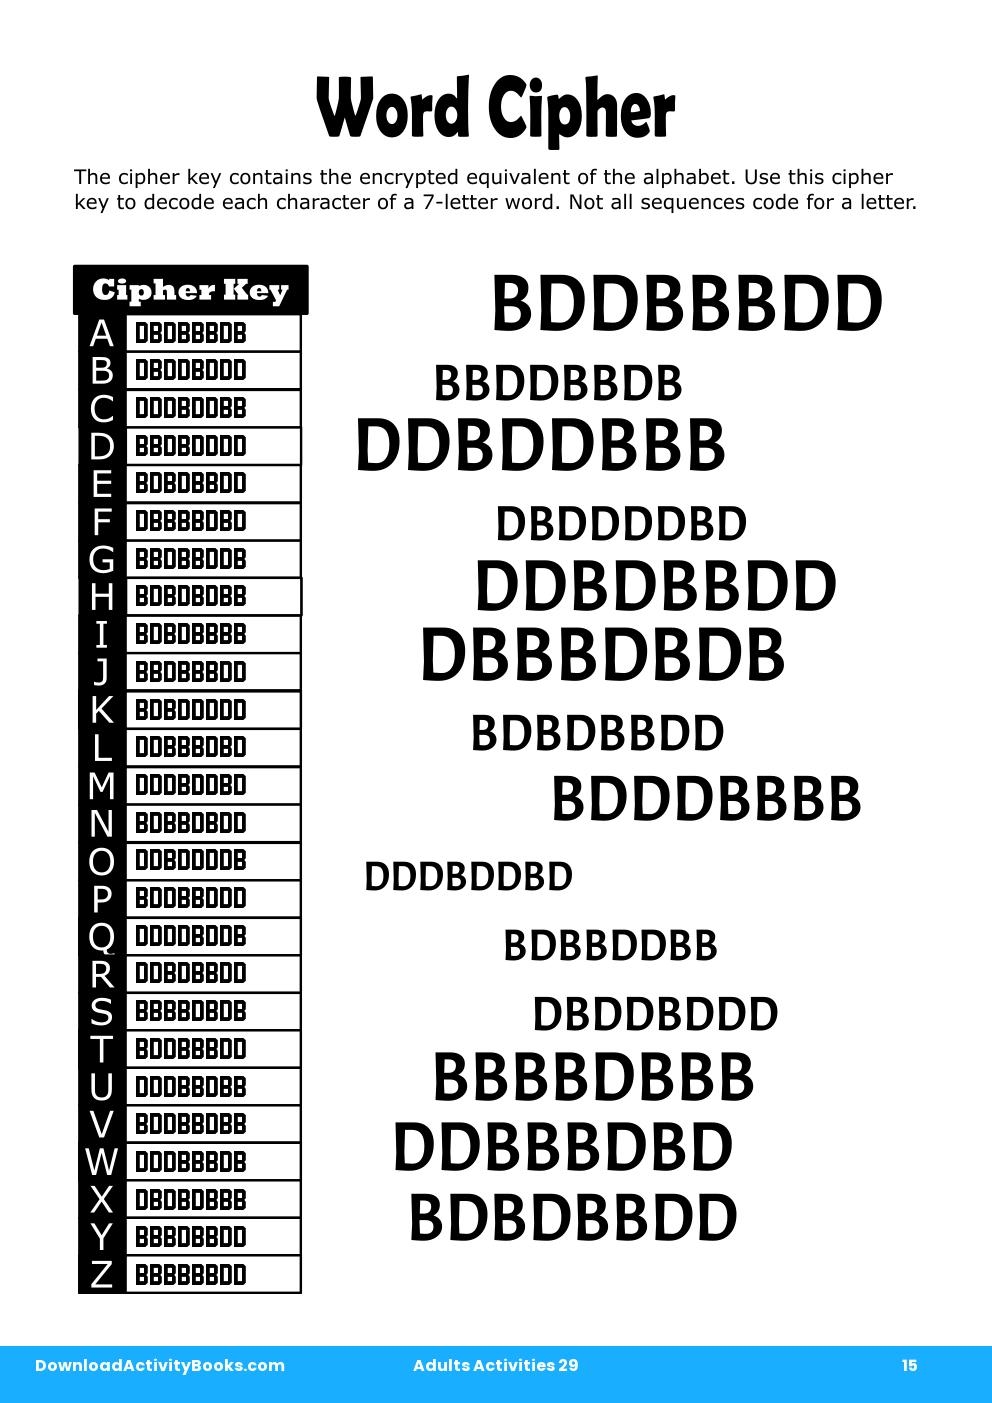 Word Cipher in Adults Activities 29